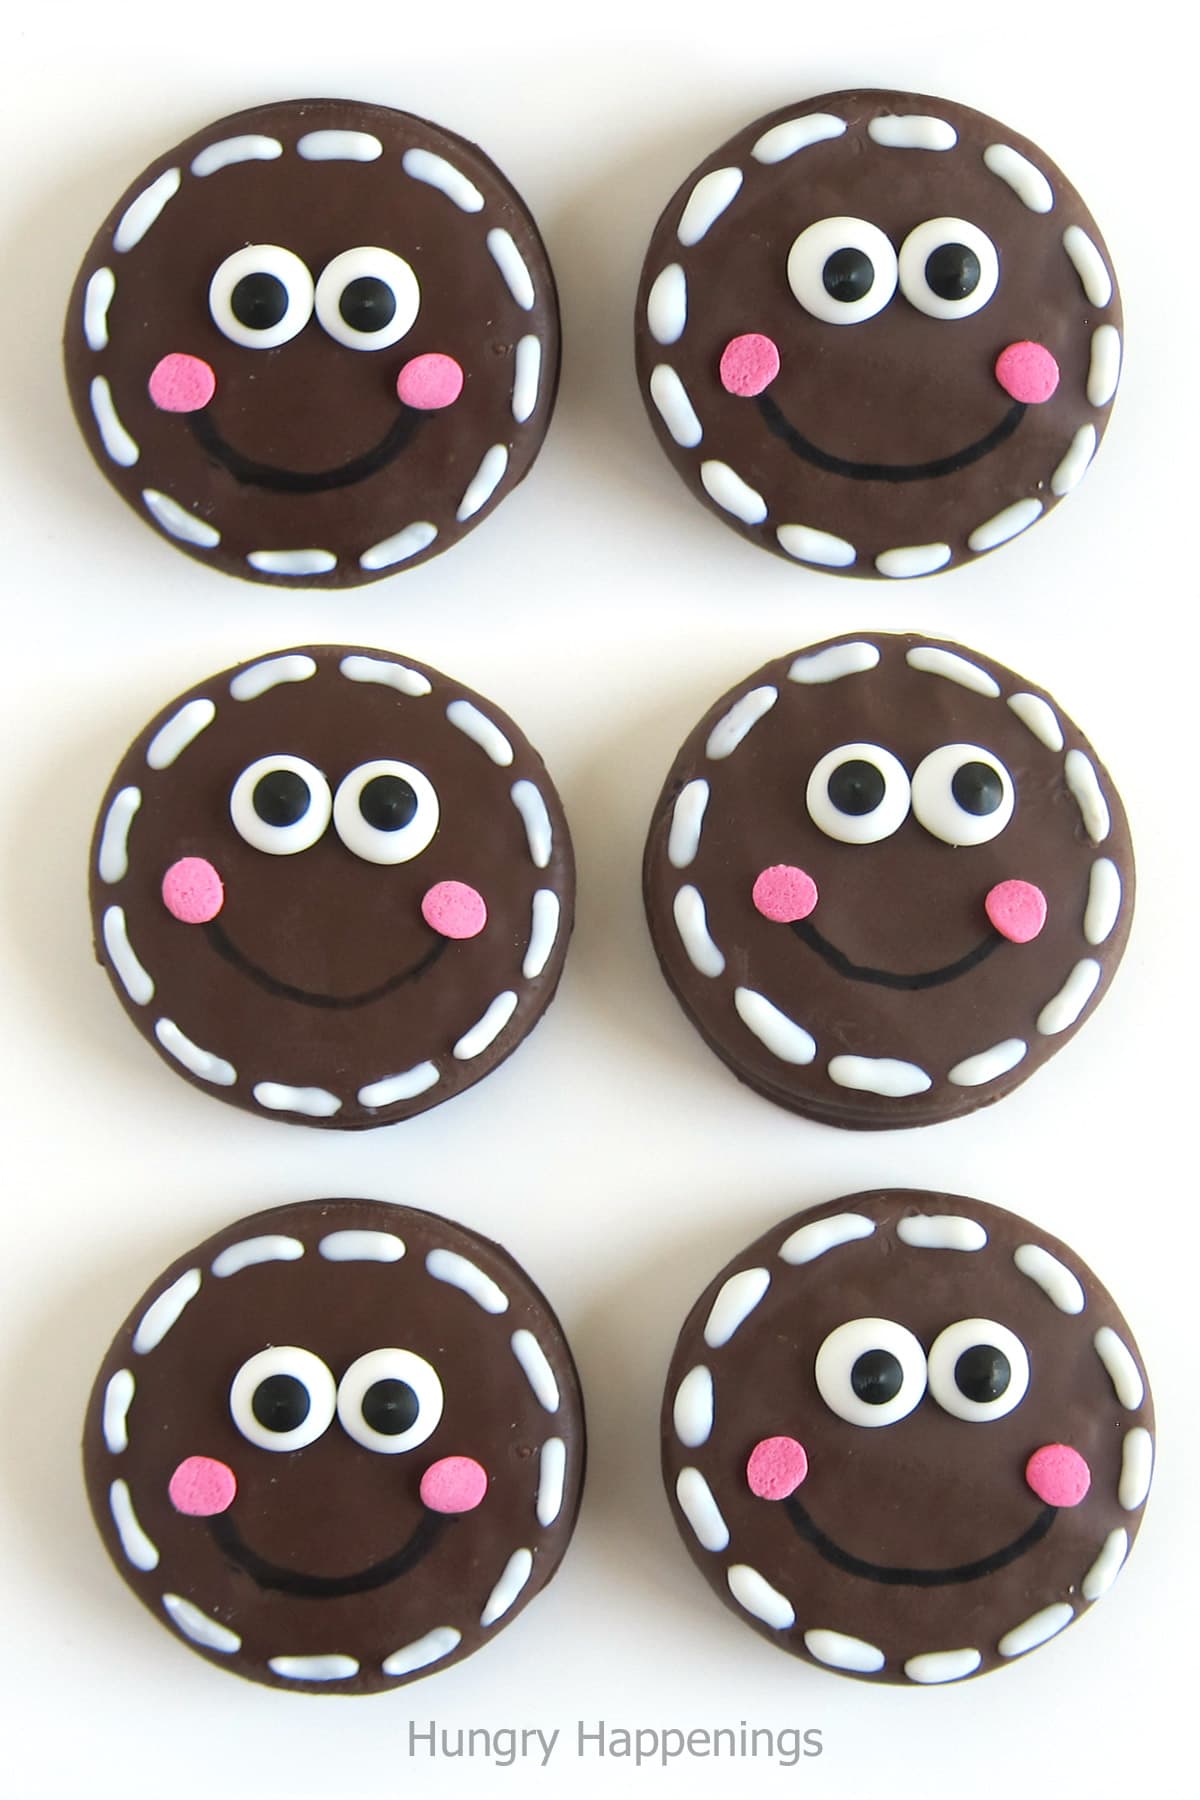 OREO Gingerbread men with cute smiles. 